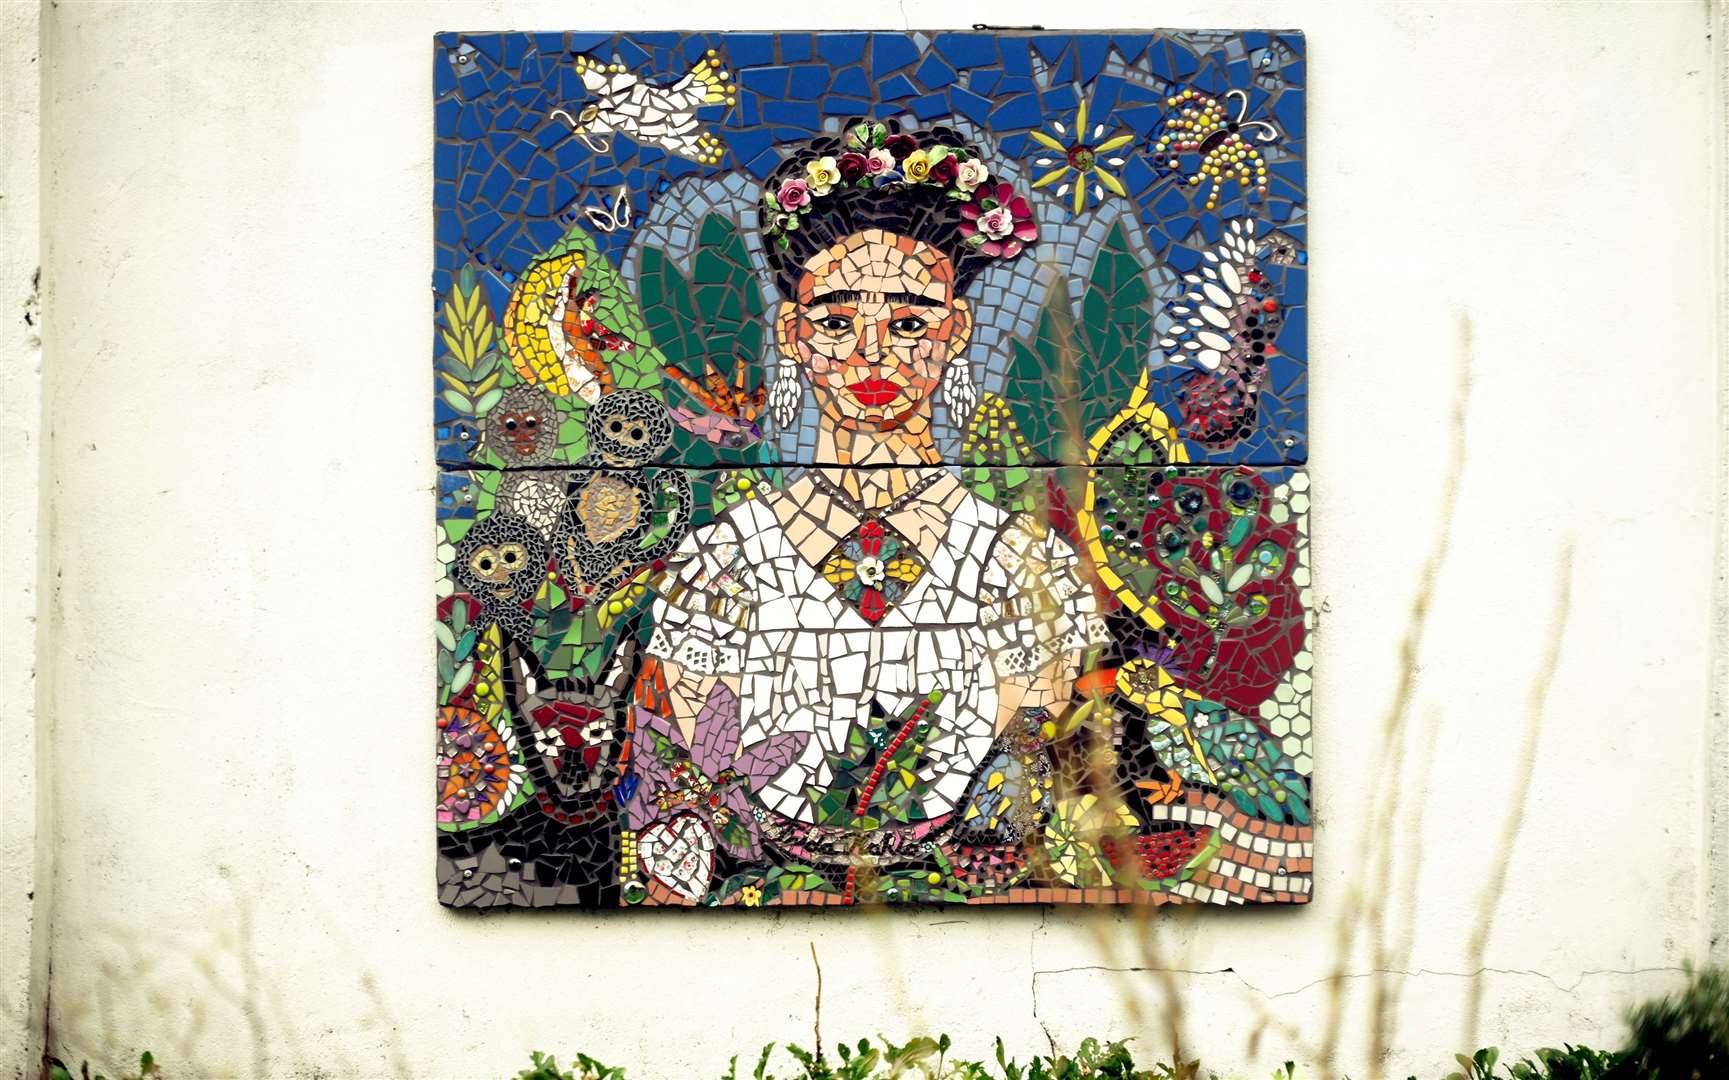 A wall mosaic based on the work of Mexican artist Frida Kahlo was installed last year. Picture: James Mackenzie.